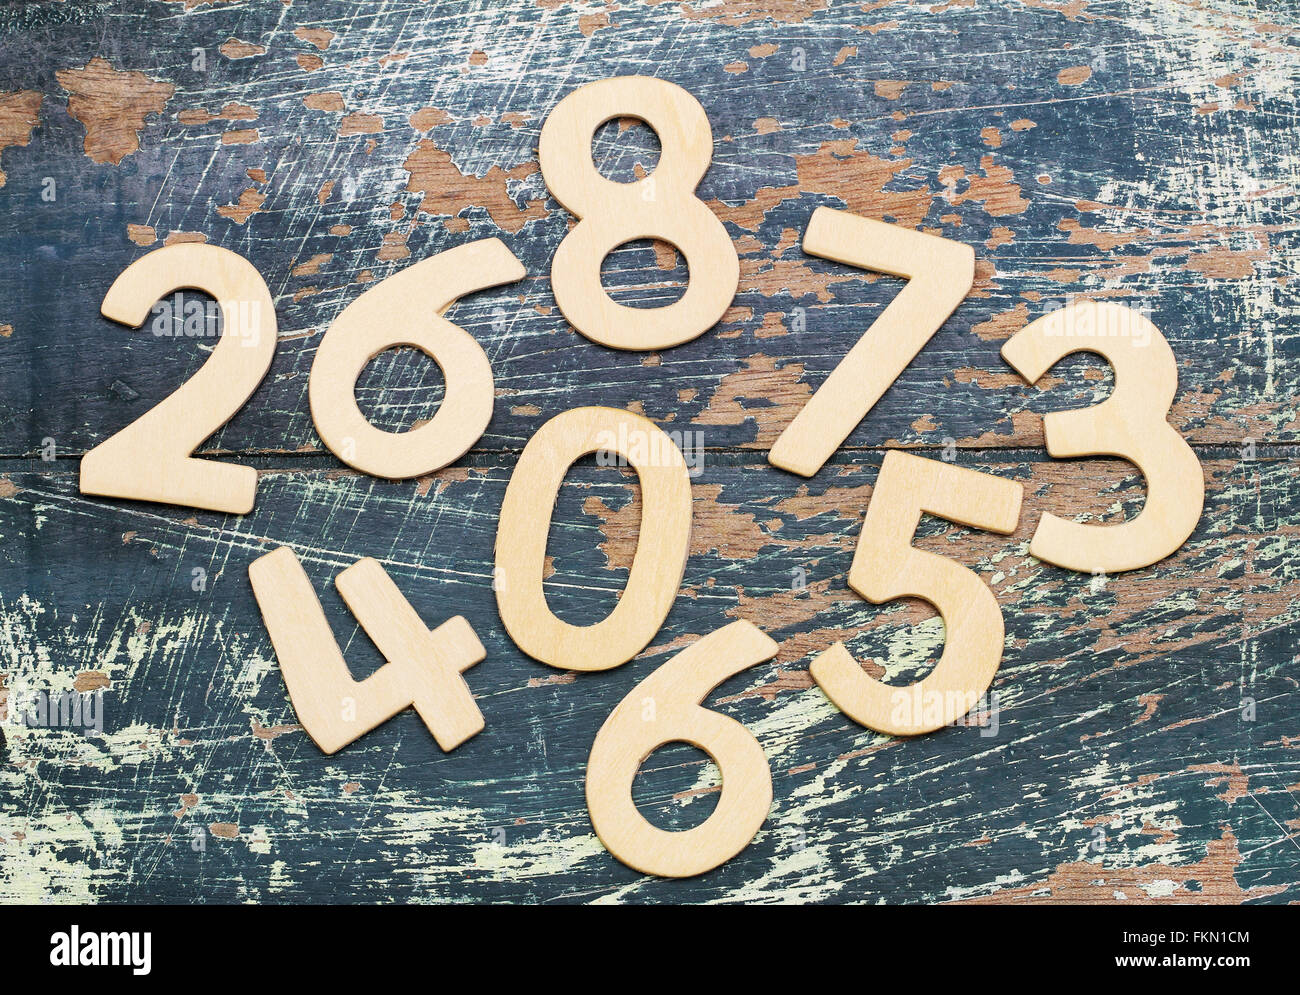 Wooden numbers scattered on rustic surface Stock Photo